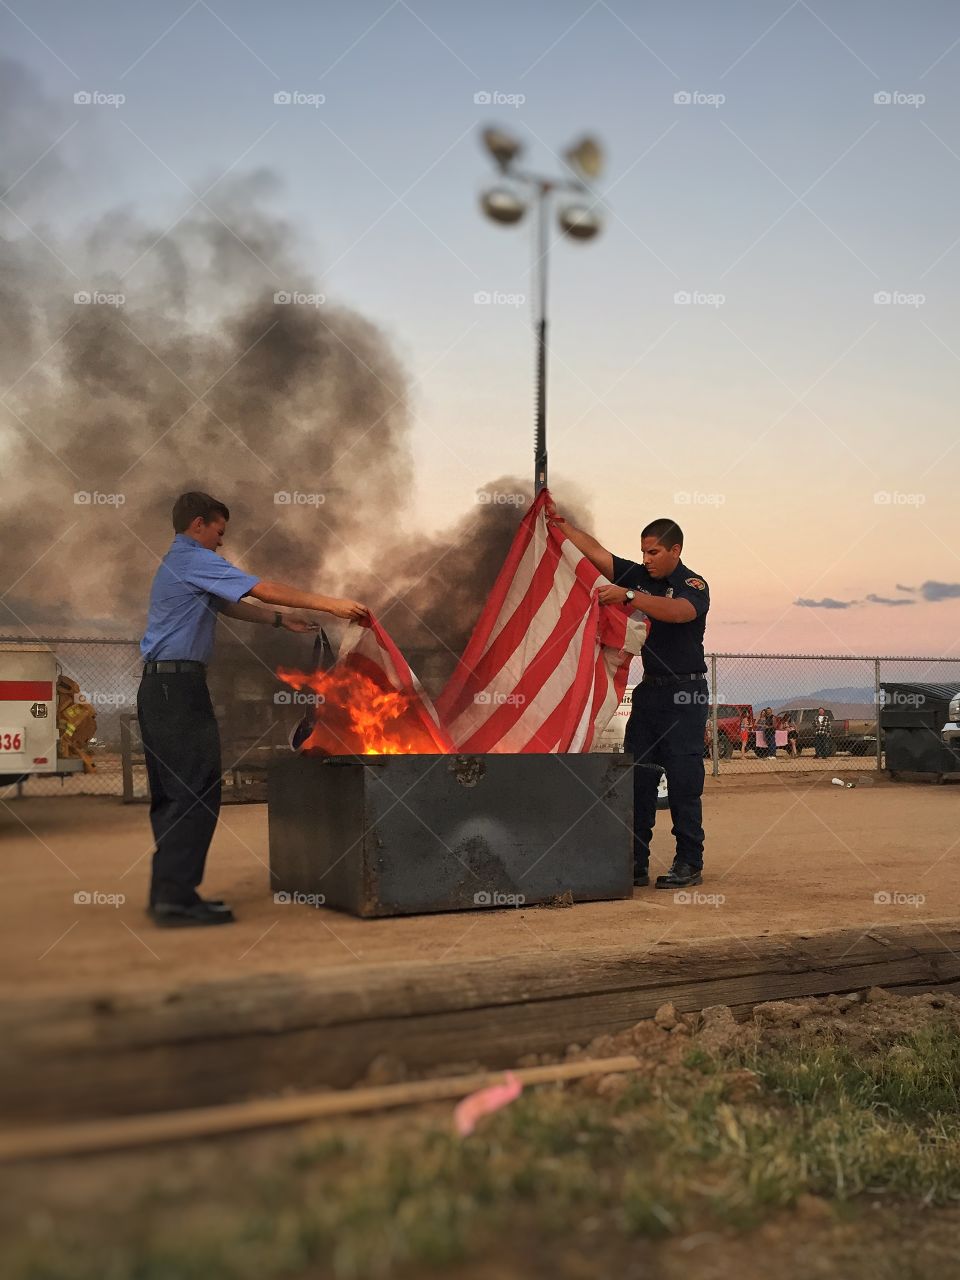 Retiring the flag. On the Fourth of July the fire department was retiring old worn-out flags in the way they're supposed be retired. 